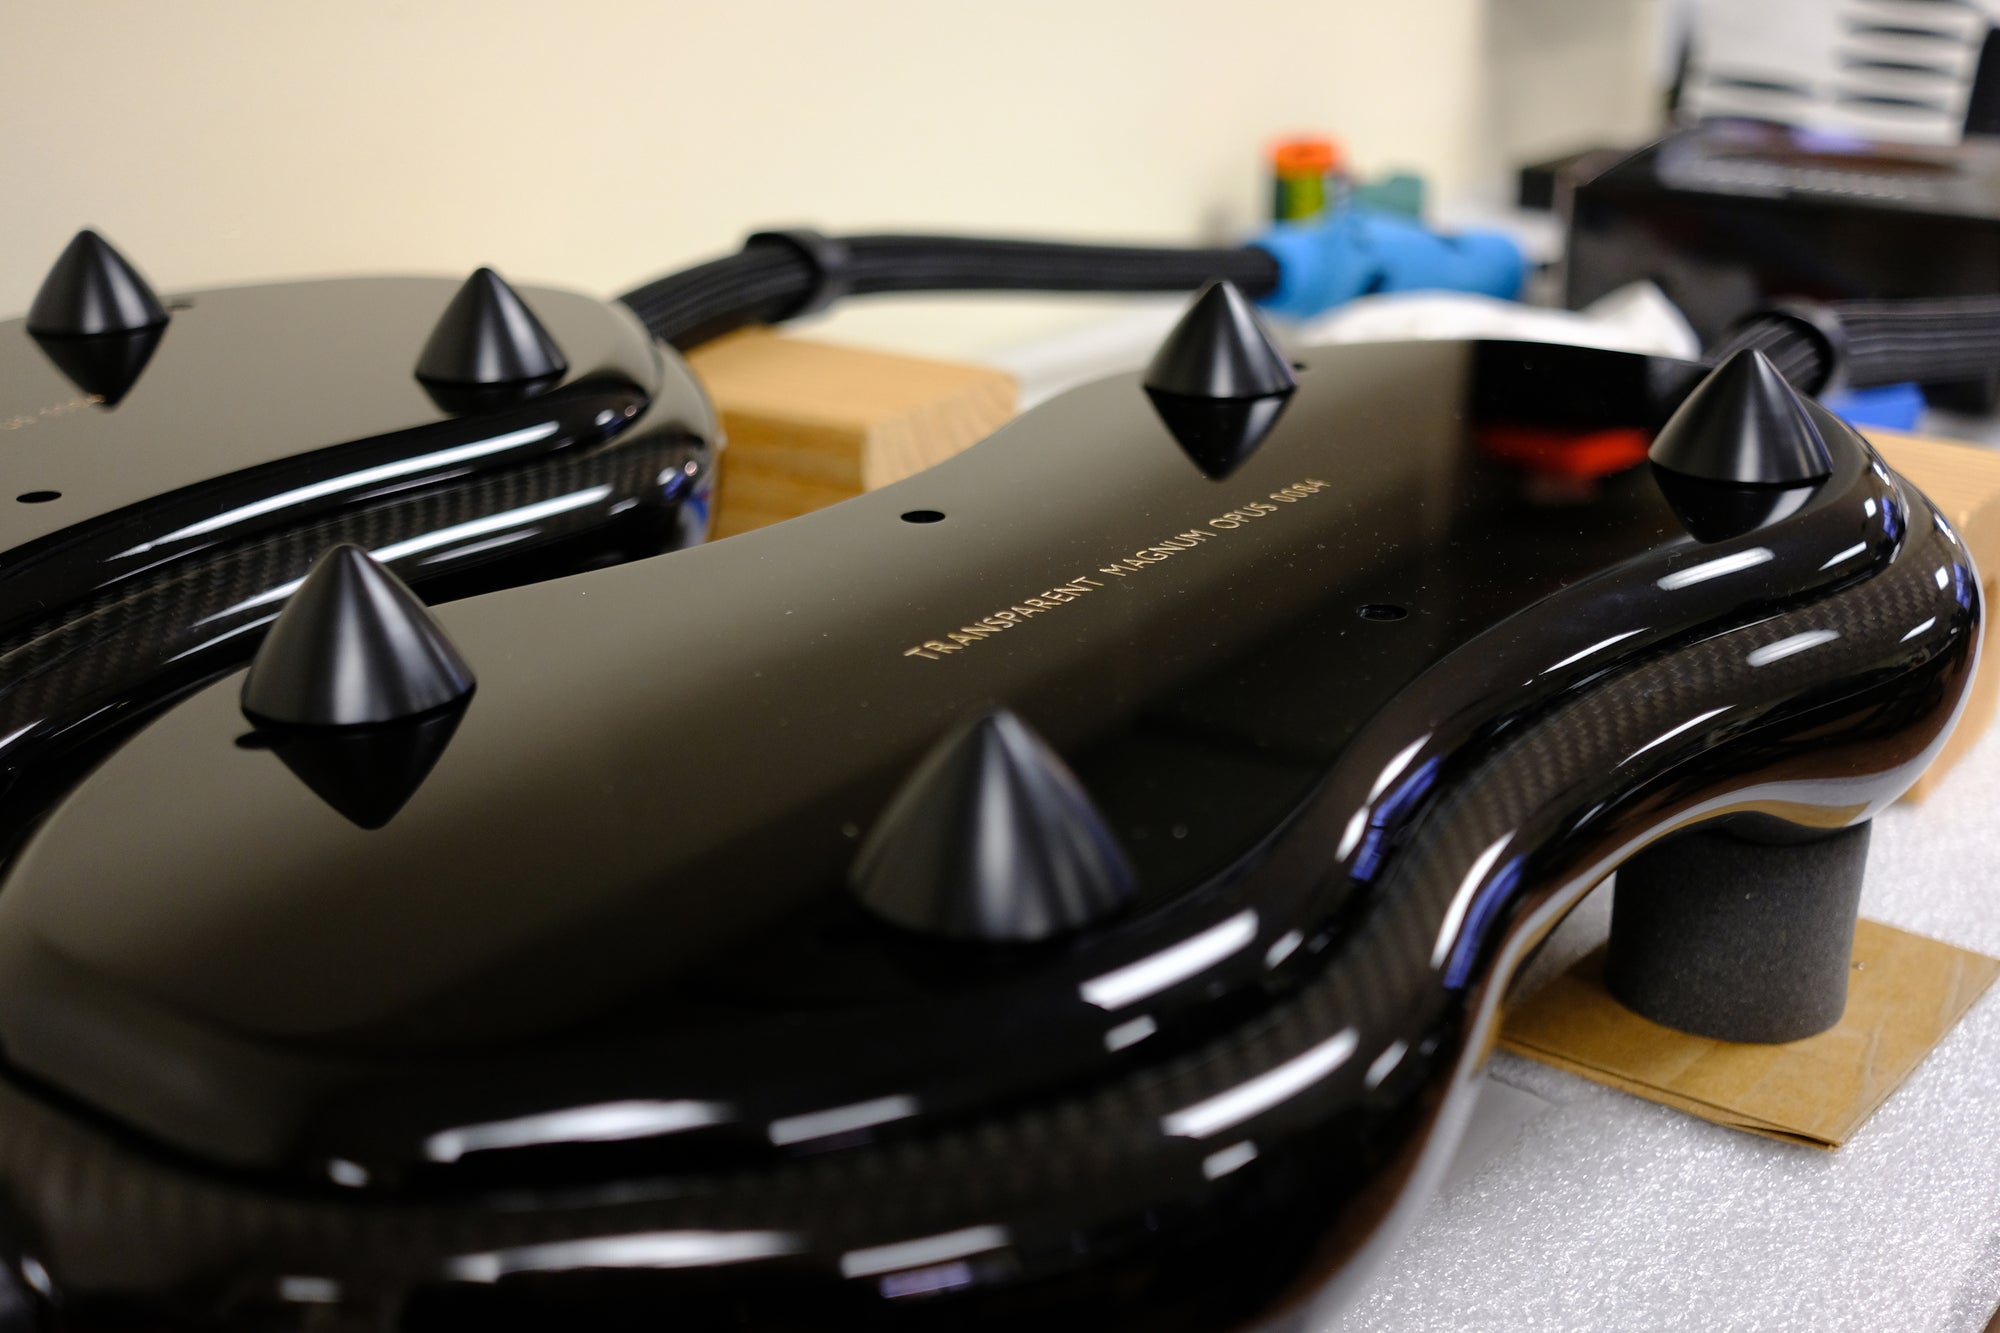 Two black gaming controllers with spikes on them.